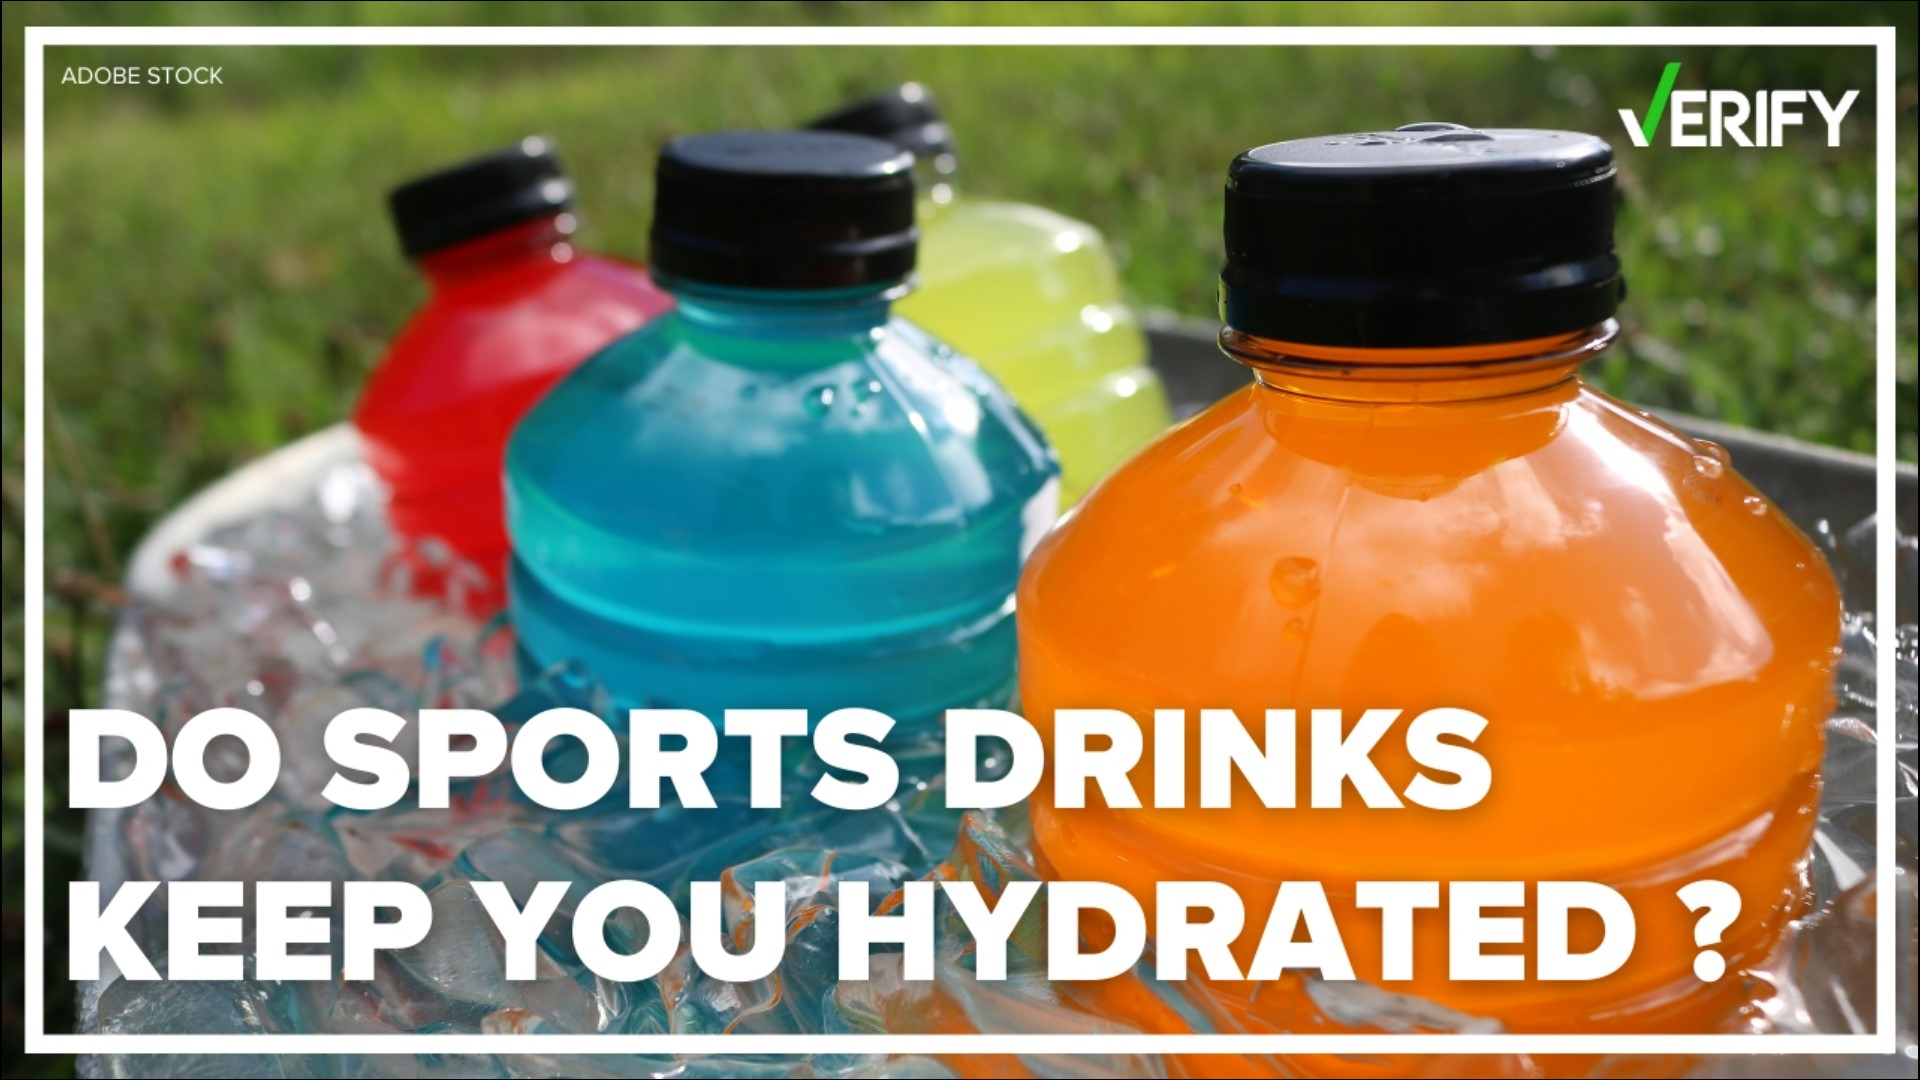 A WCNC Charlotte viewer wanted to know if sports drinks are a good hydration option as more extreme heat is headed to the area.